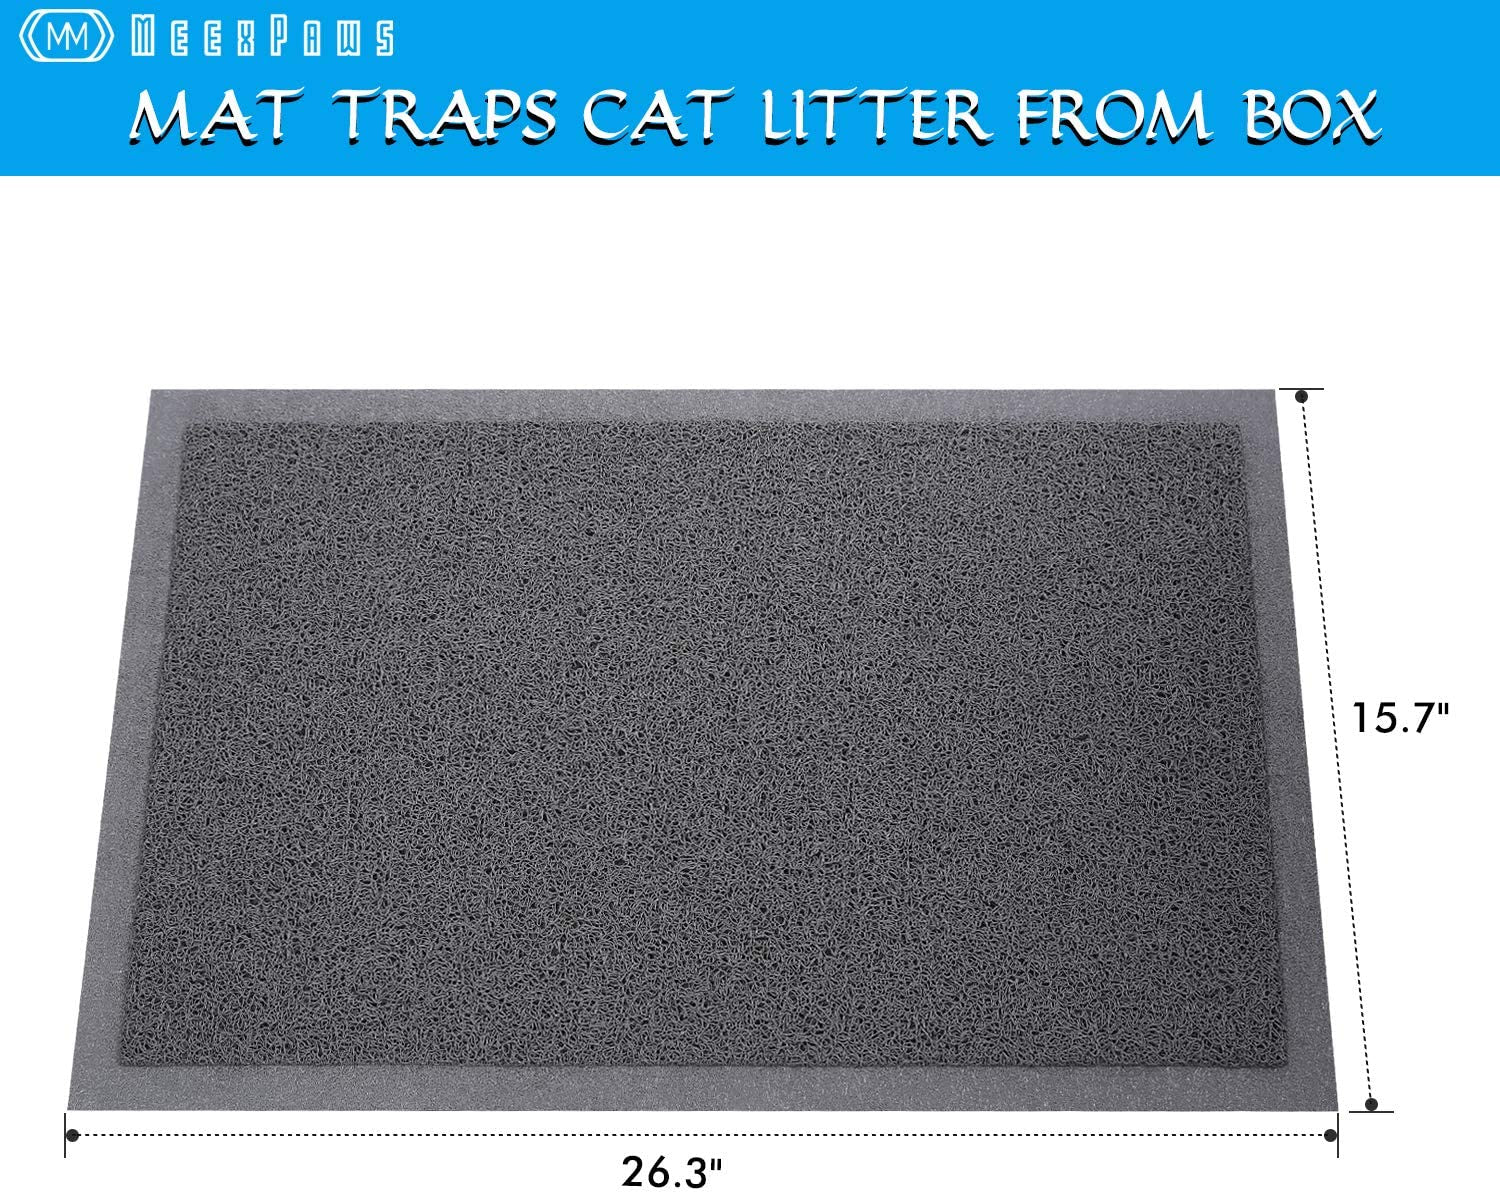 Cat Litter Box Enclosure Furniture Hidden, Cat Washroom Bench Storage Cabinet | Extra Large | Dog Proof | Waterproof Inside/Easy Clean | Easy Assembly | Odor Control |